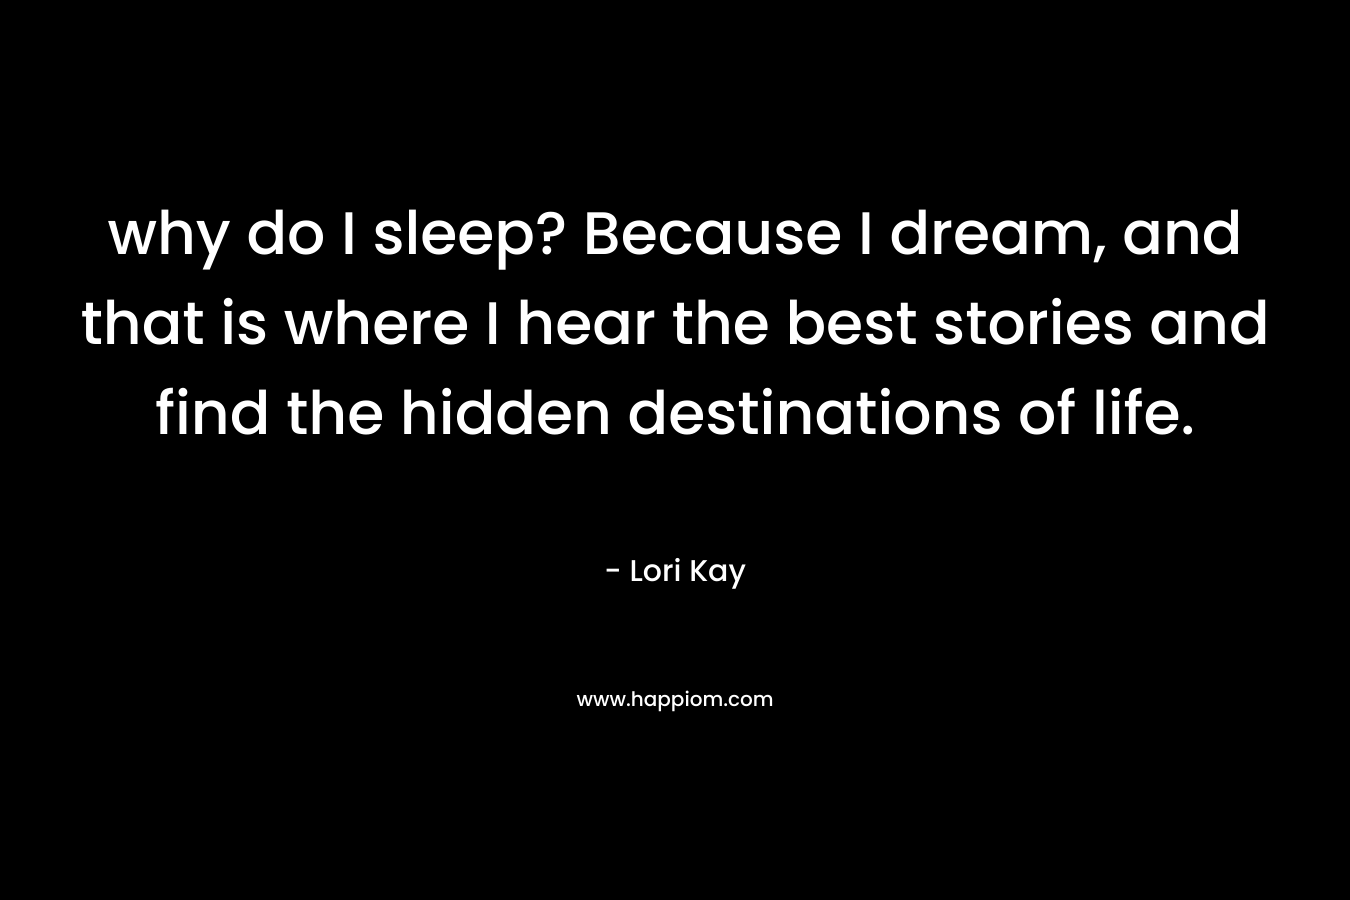 why do I sleep? Because I dream, and that is where I hear the best stories and find the hidden destinations of life.